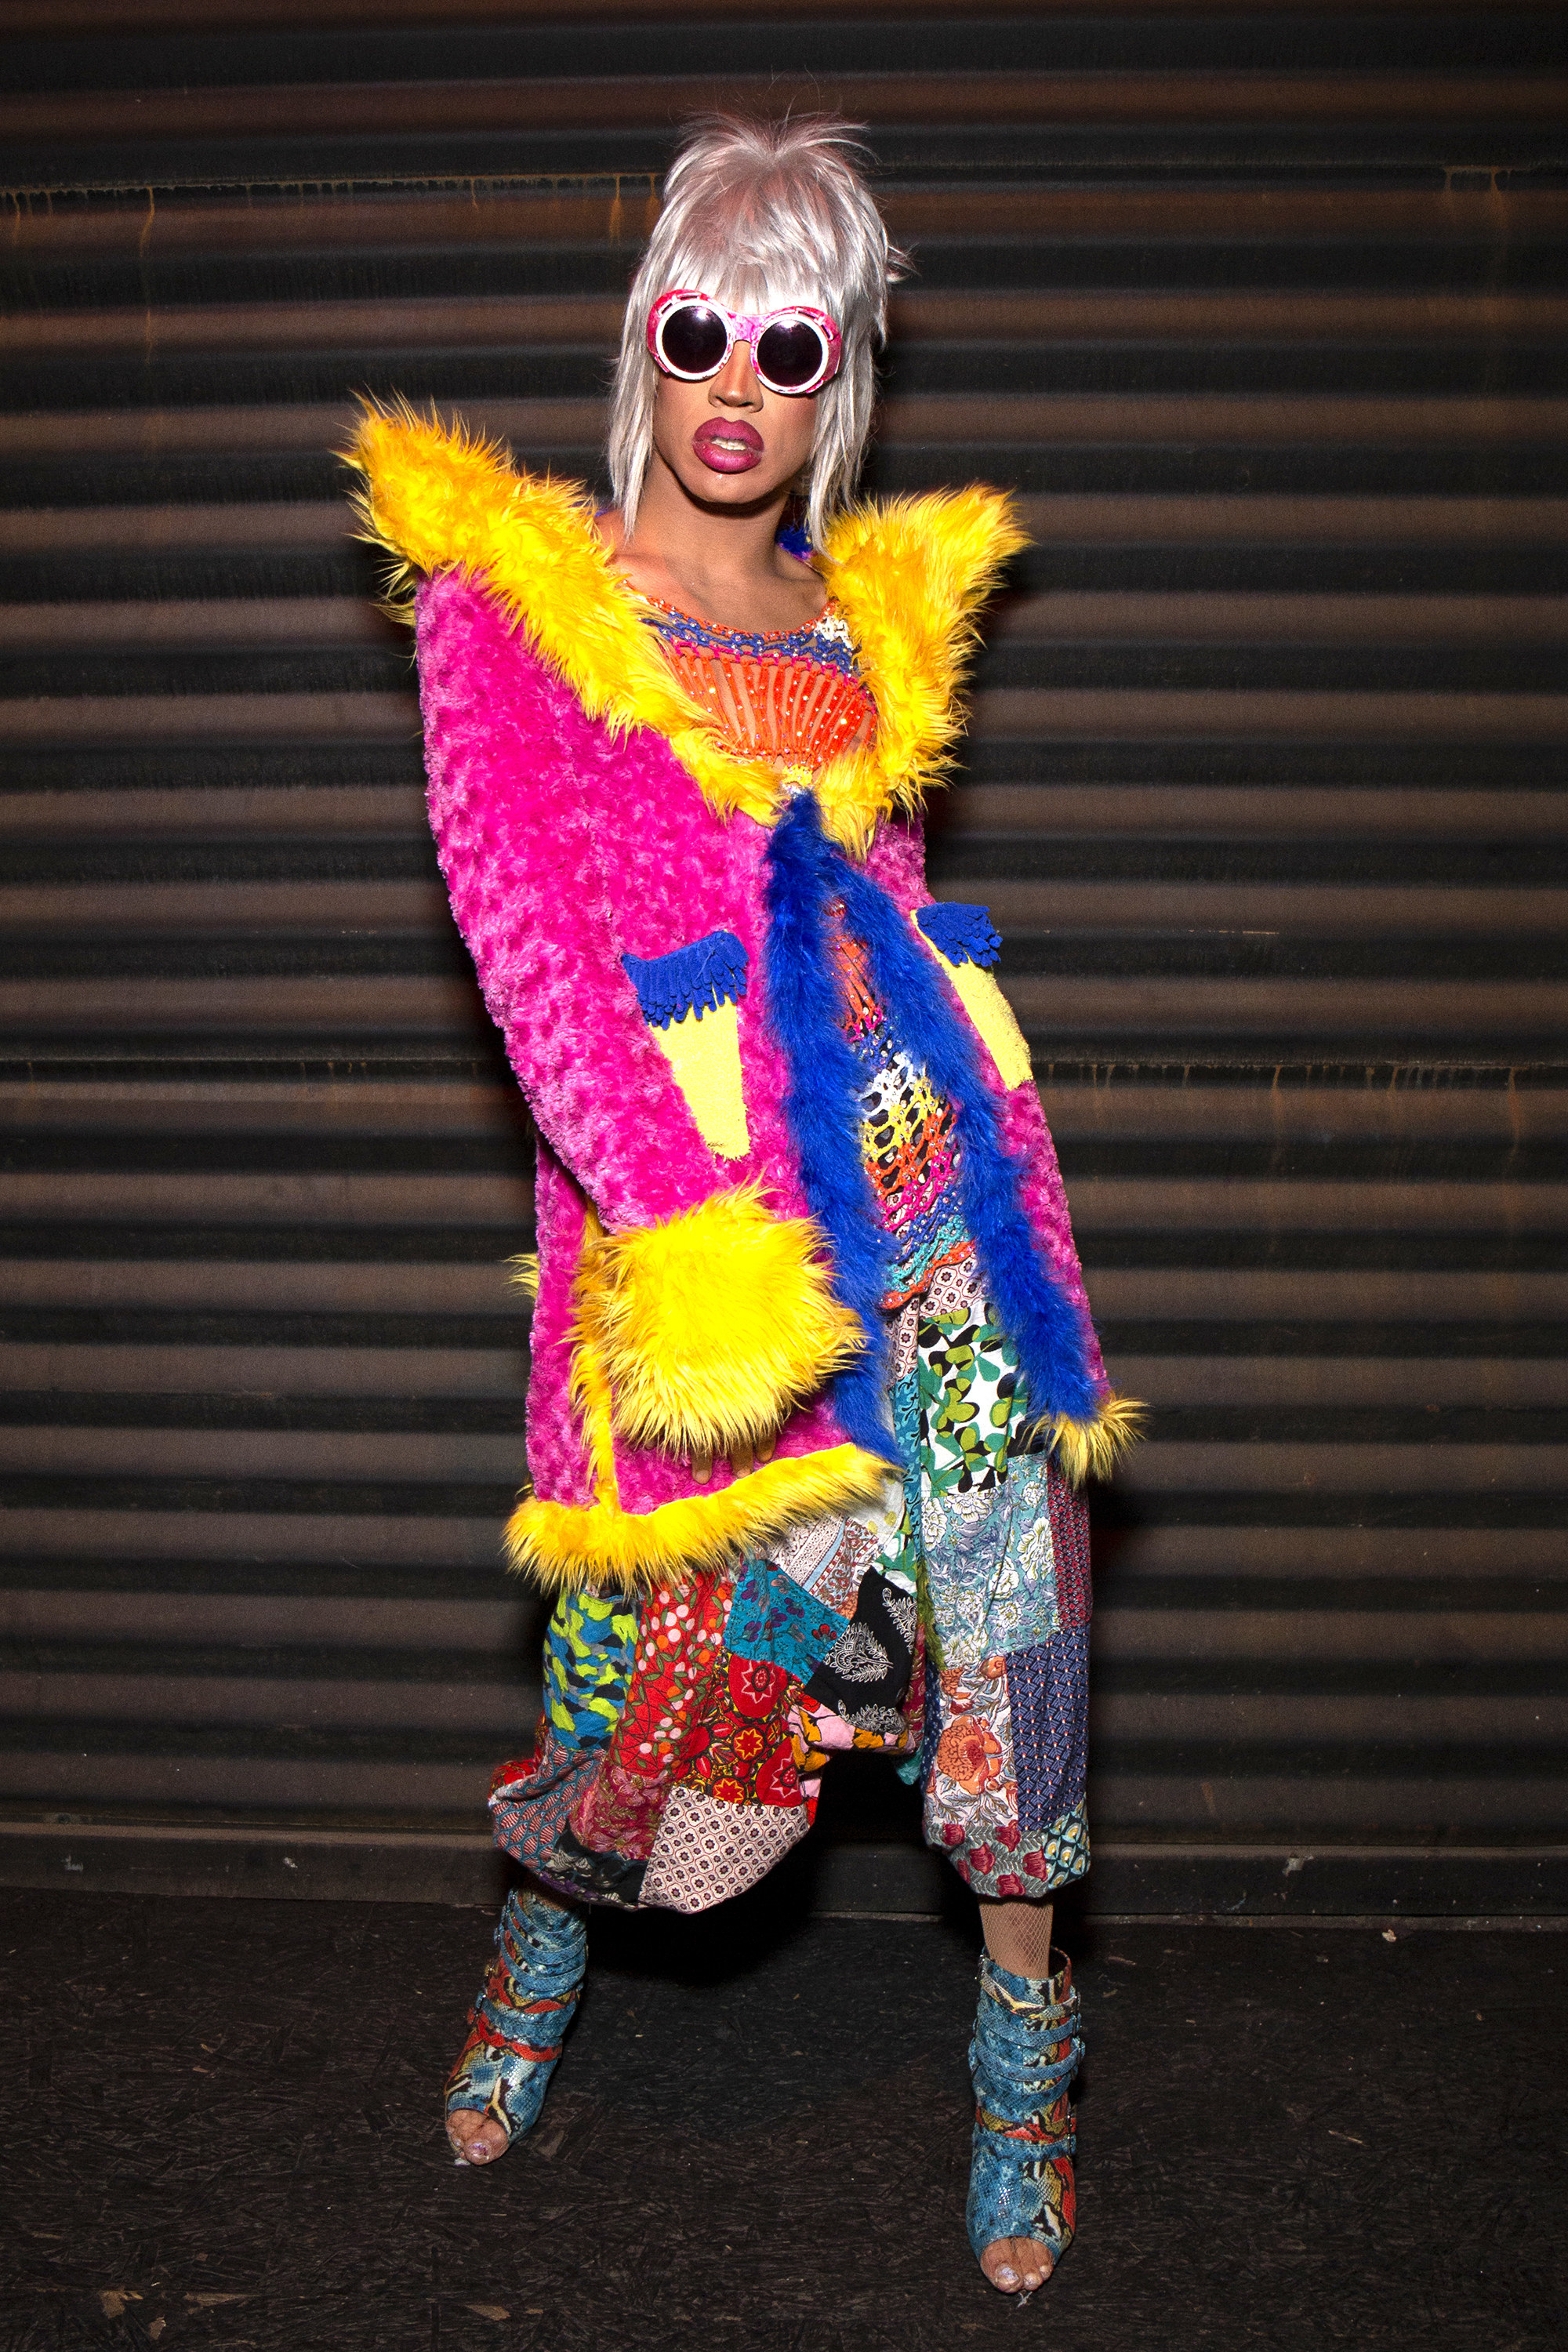 yvie oddly poses for a photo